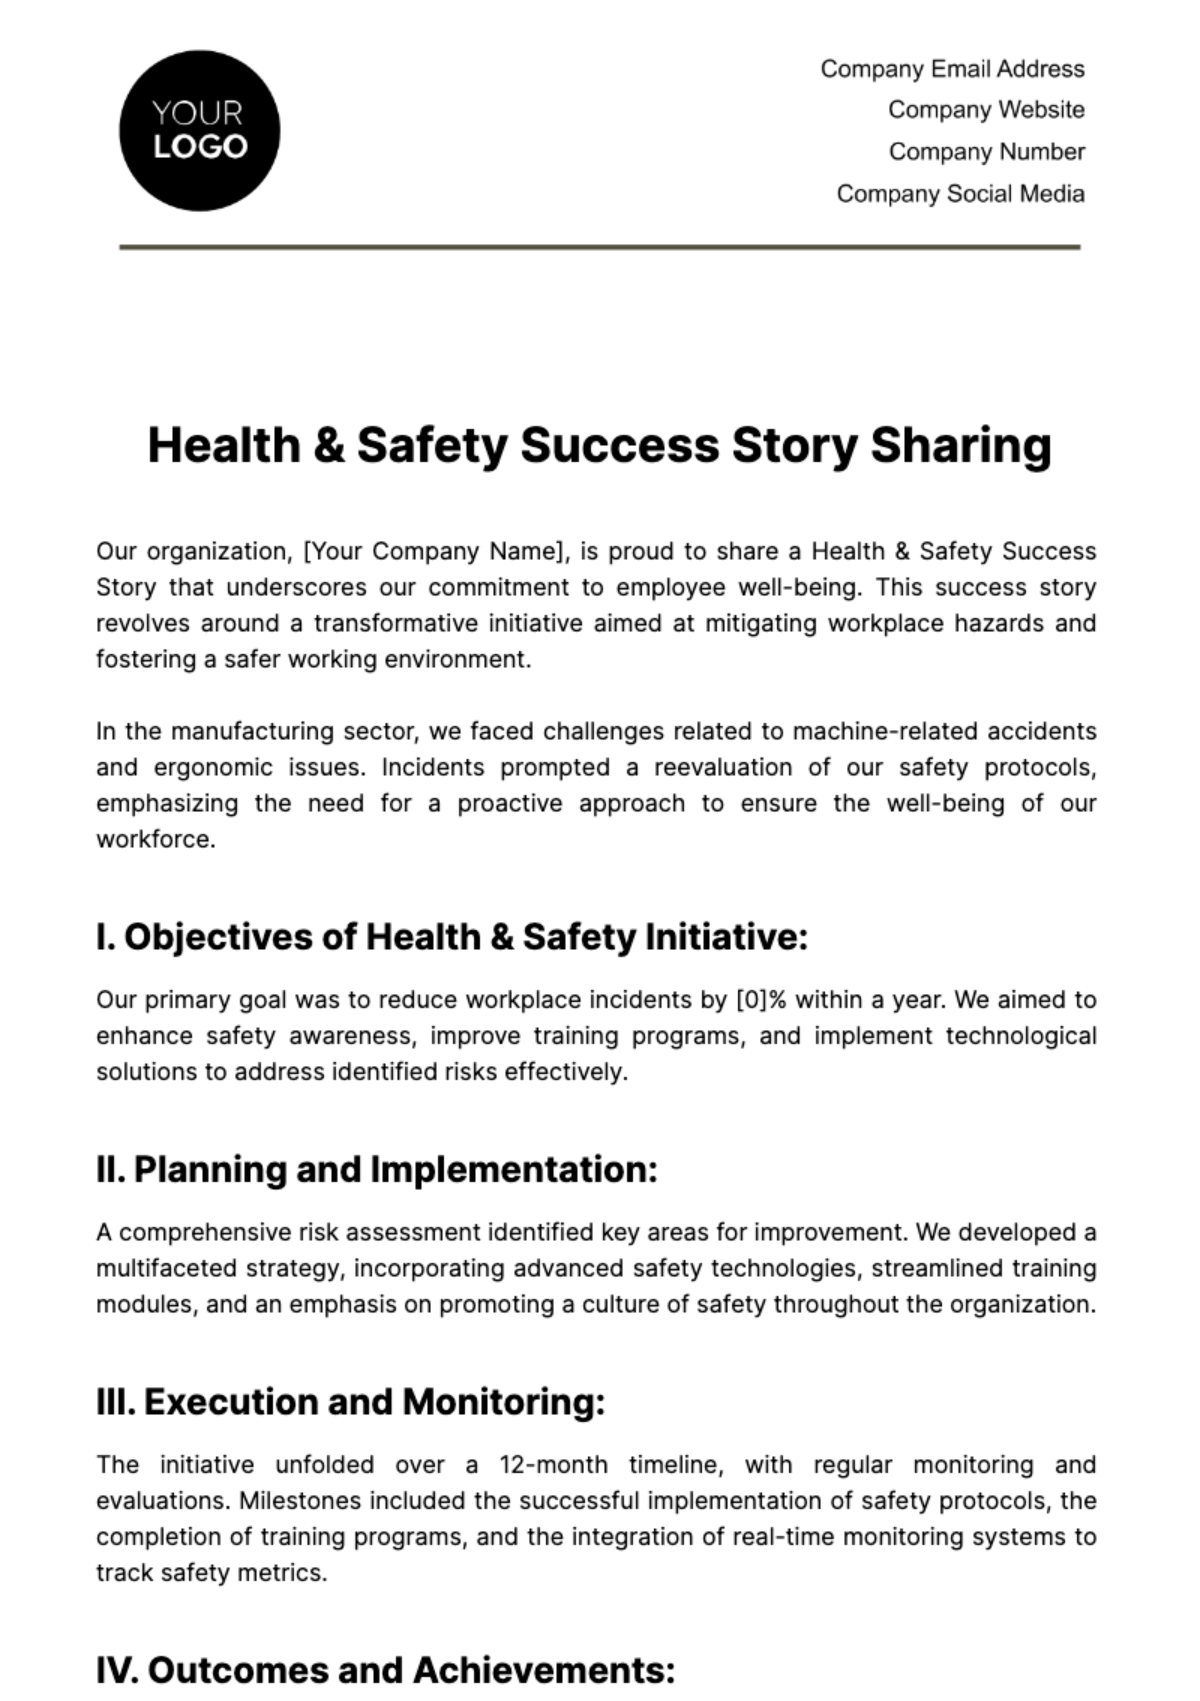 Health & Safety Success Story Sharing Template